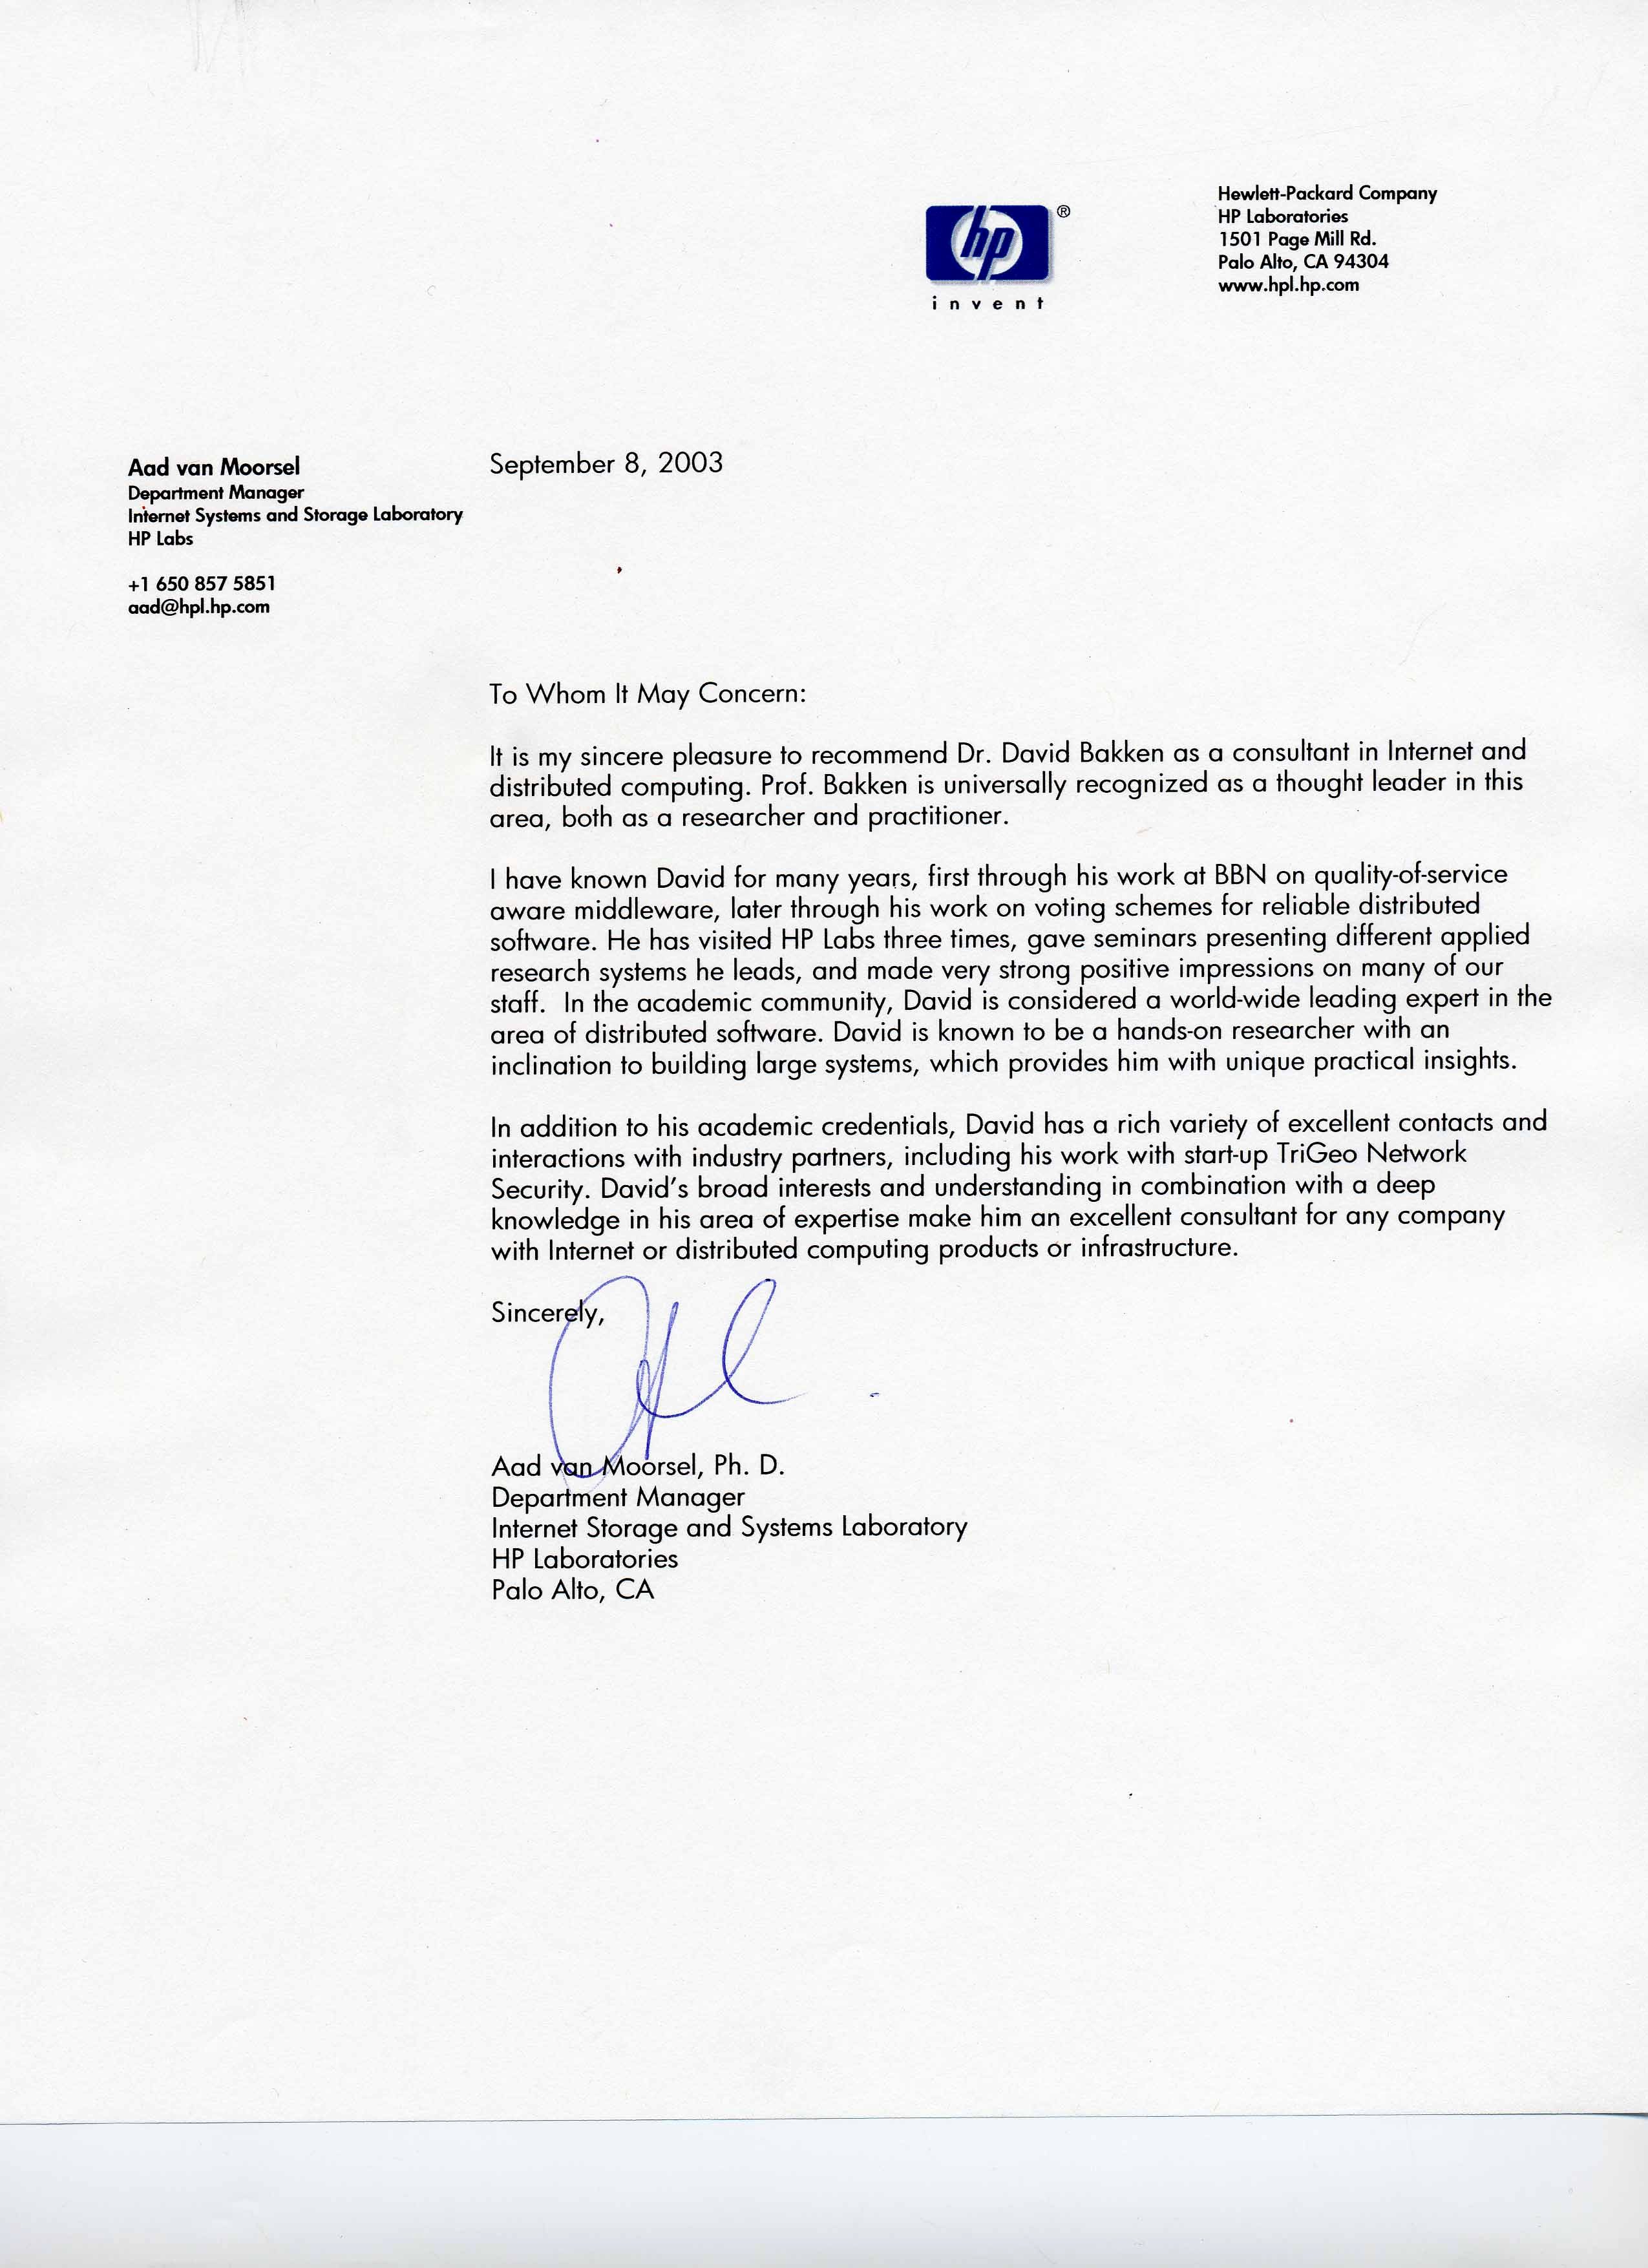 Vendor Recommendation Letter Sample New Consulting Letters Of Reference for Dr